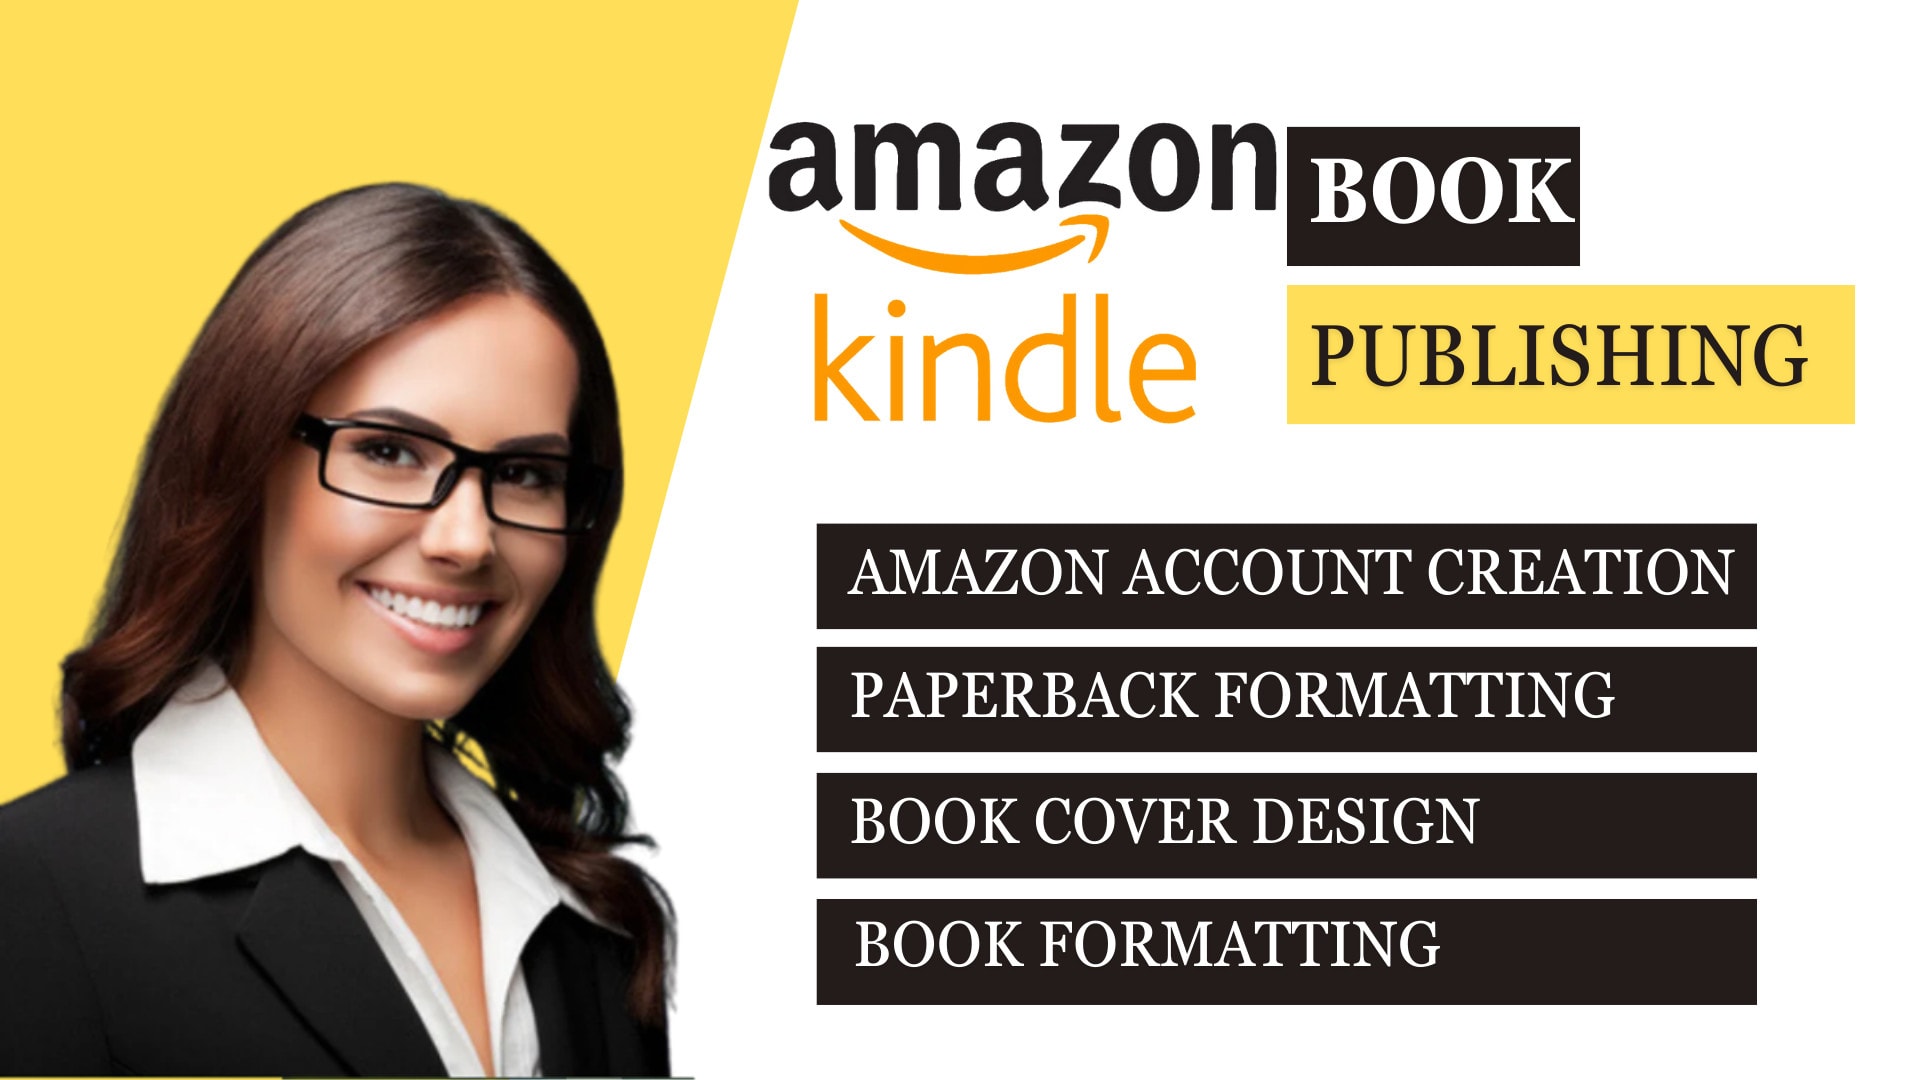 How to Publish A Book on Kindle